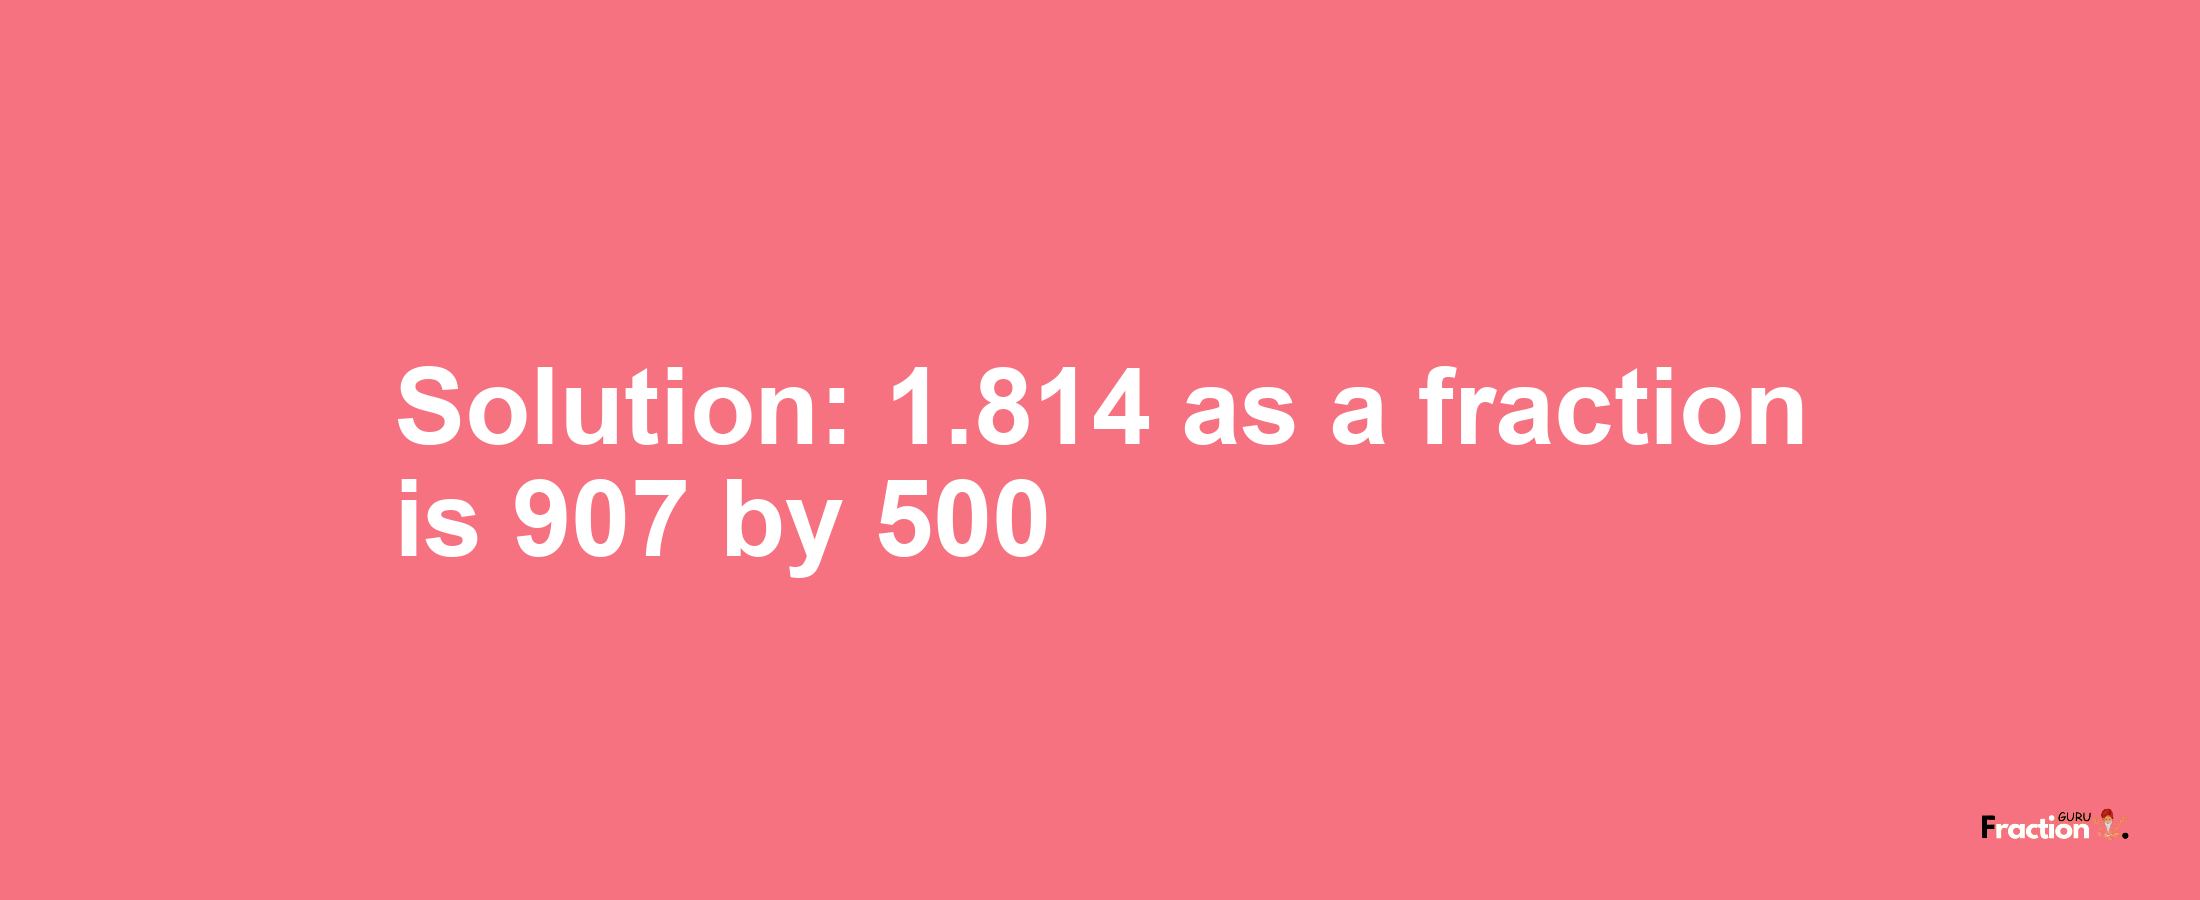 Solution:1.814 as a fraction is 907/500